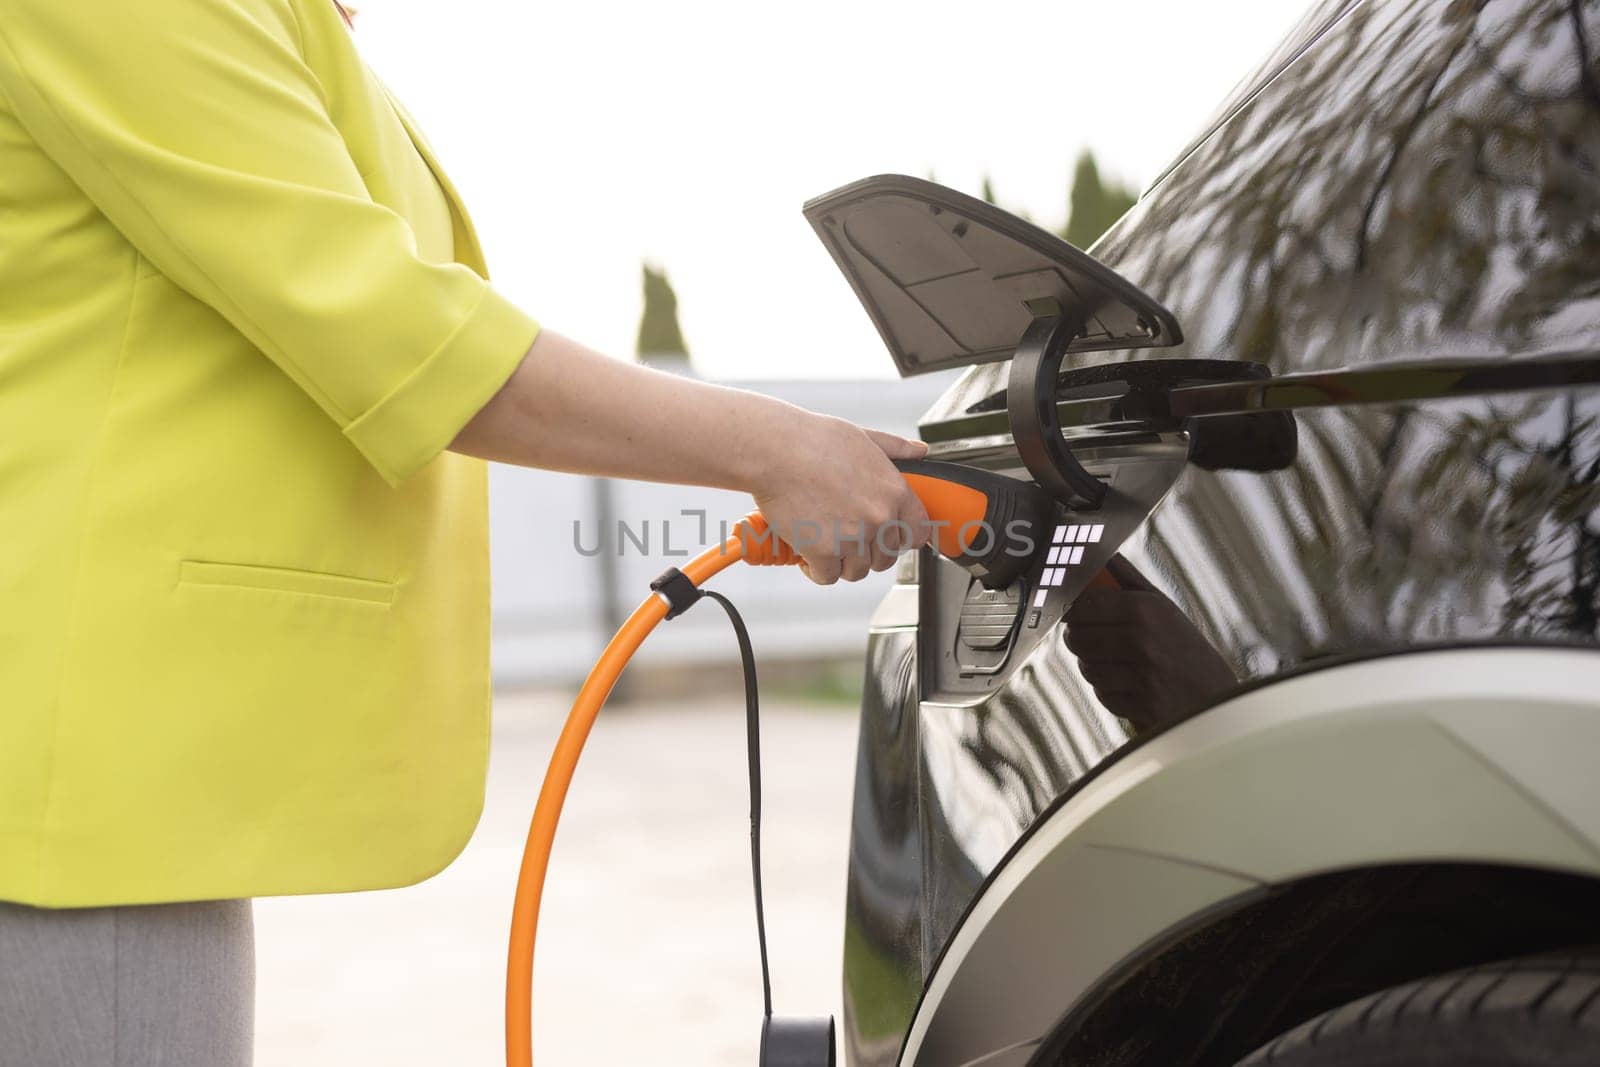 The driver of the electric car inserts the electrical connector to charge the batteries. Unrecognizable woman attaching power cable to electric car. Electric vehicle Recharging battery charging port.